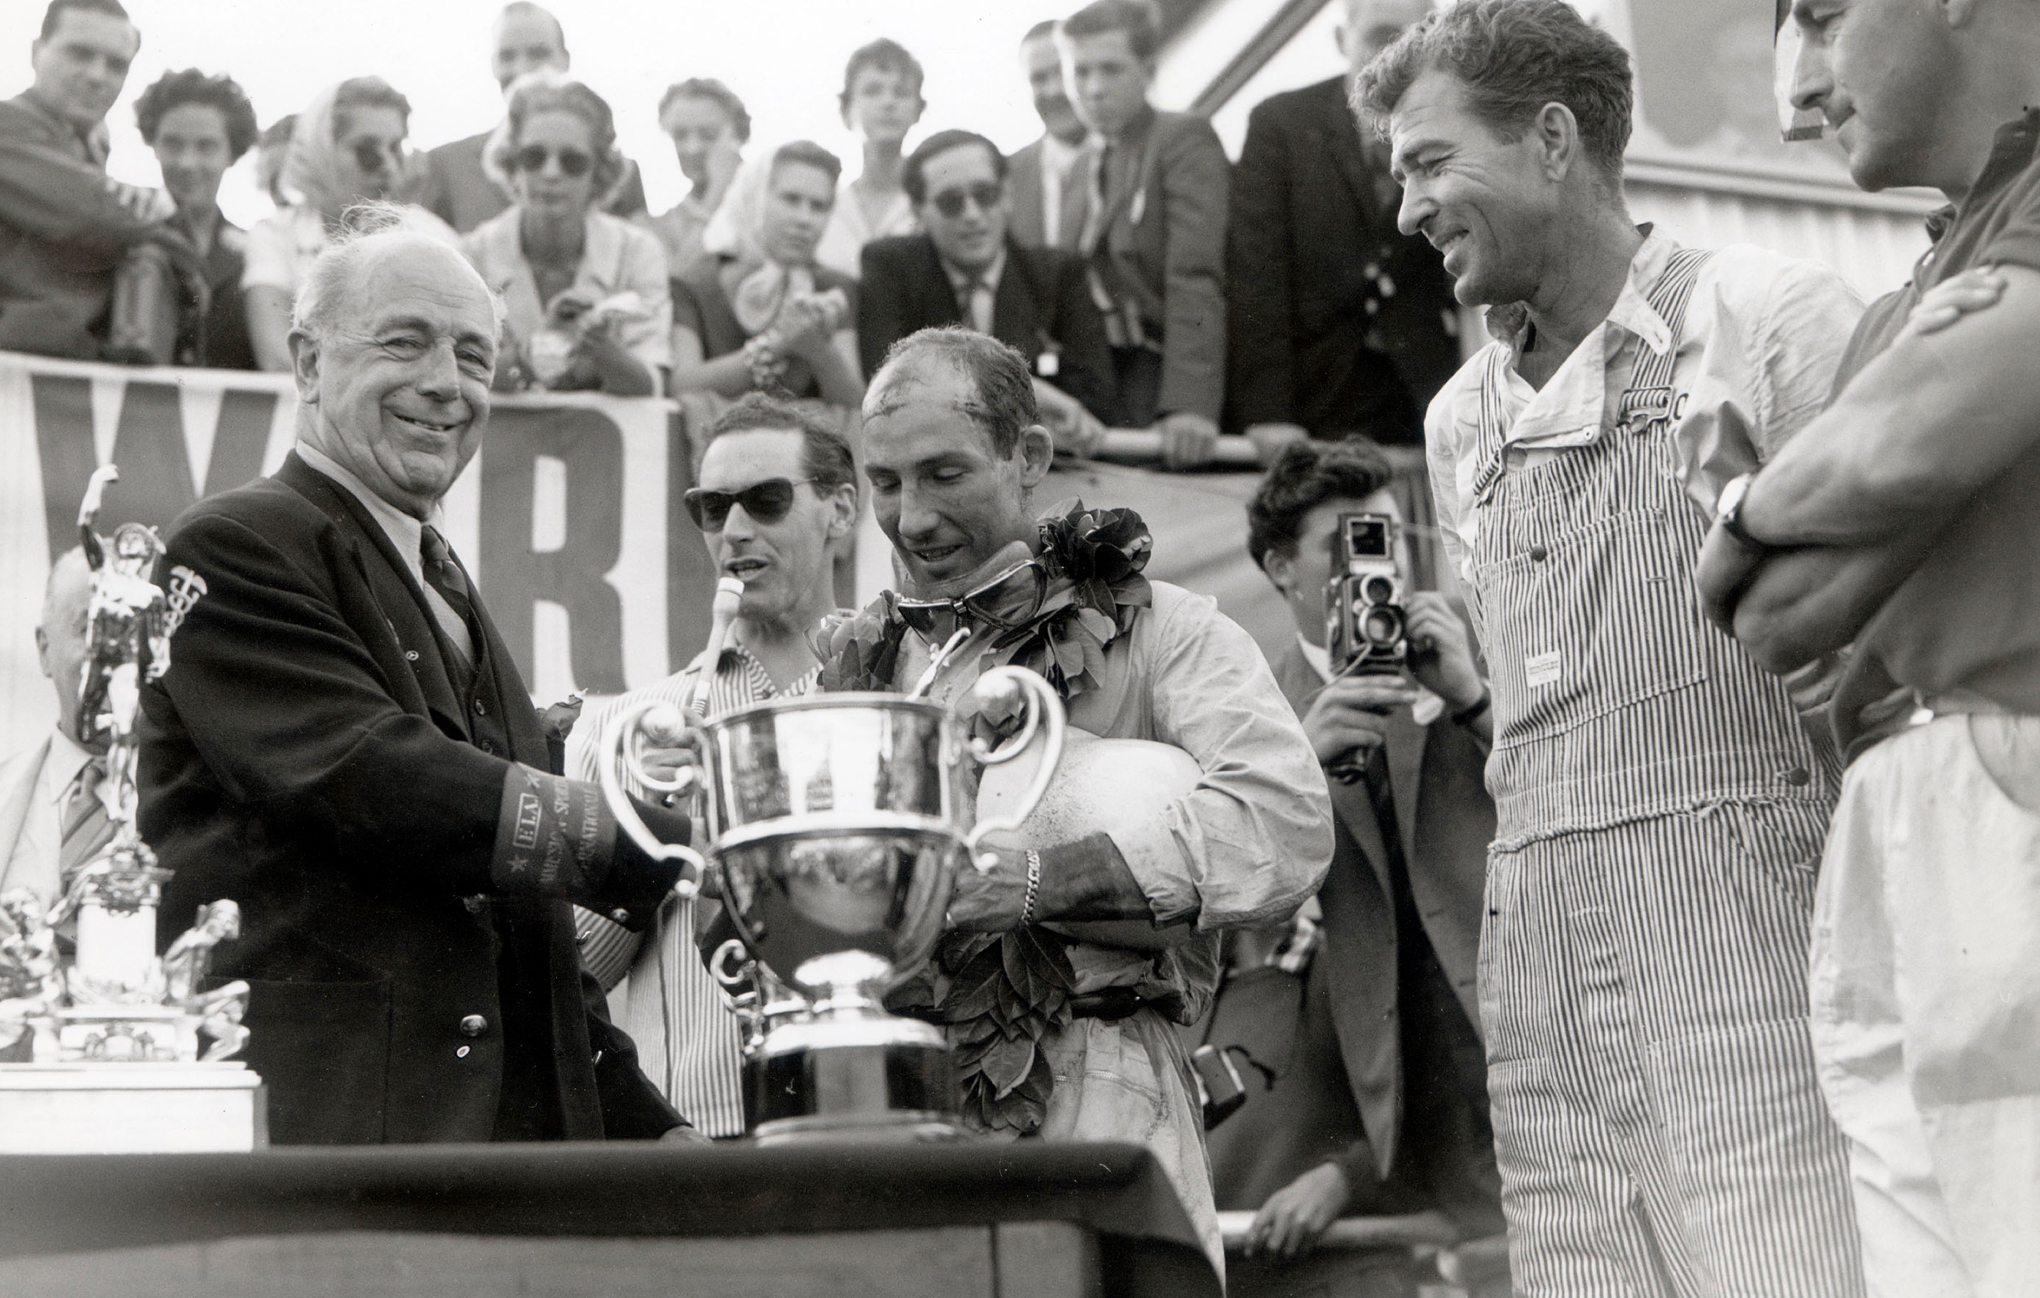 <strong>THE YEARS SPEED BY</strong><br/><span>A look at Goodwood down through the years, including the moment Stirling Moss and Carroll Shelby shared the stage during the victory ceremony</span> 